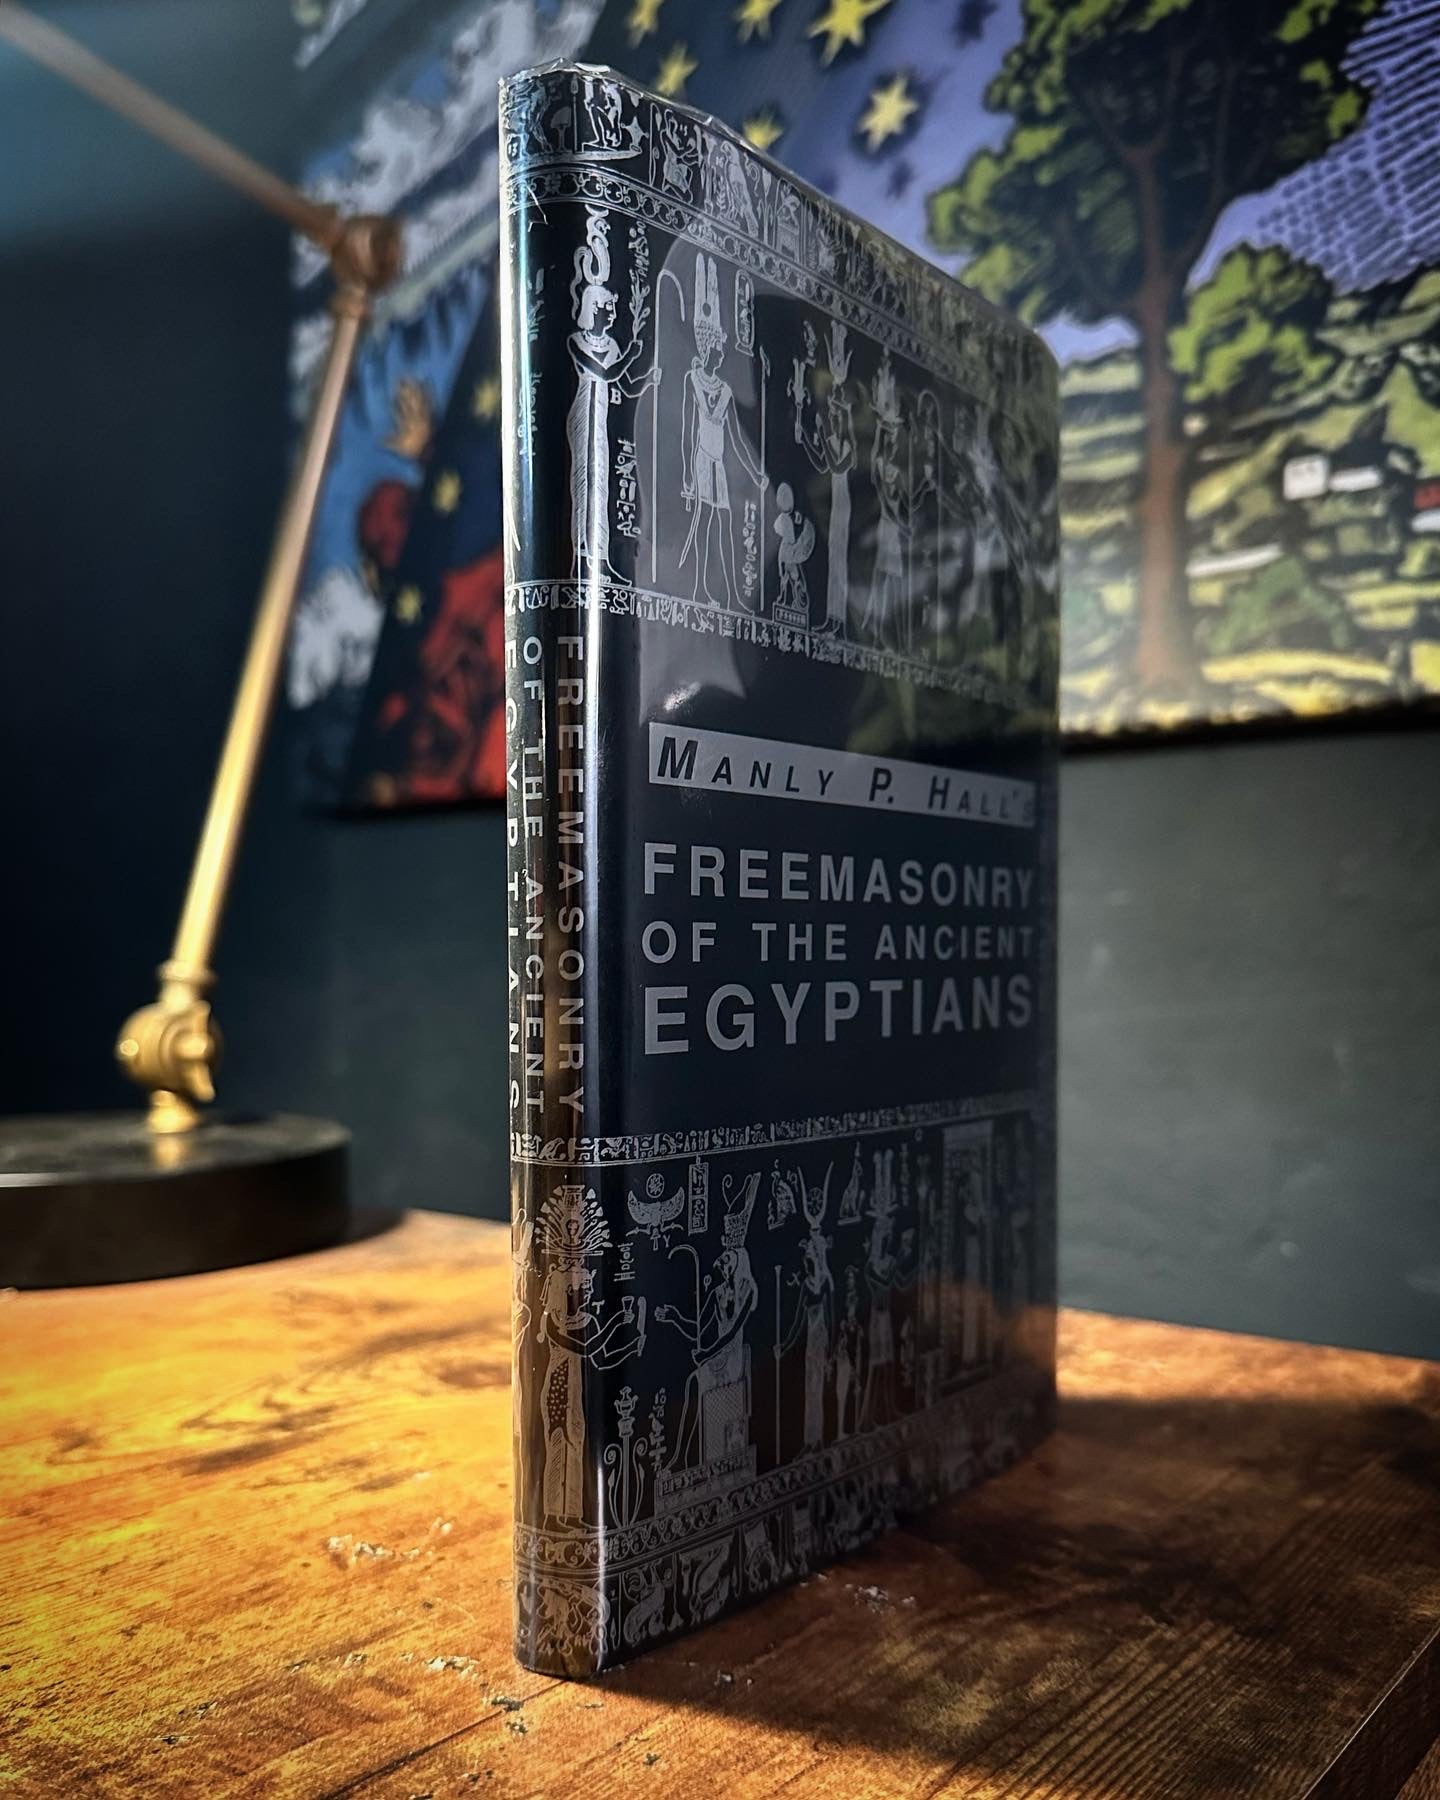 Freemasonry of The Ancient Egyptians by Manly P. Hall